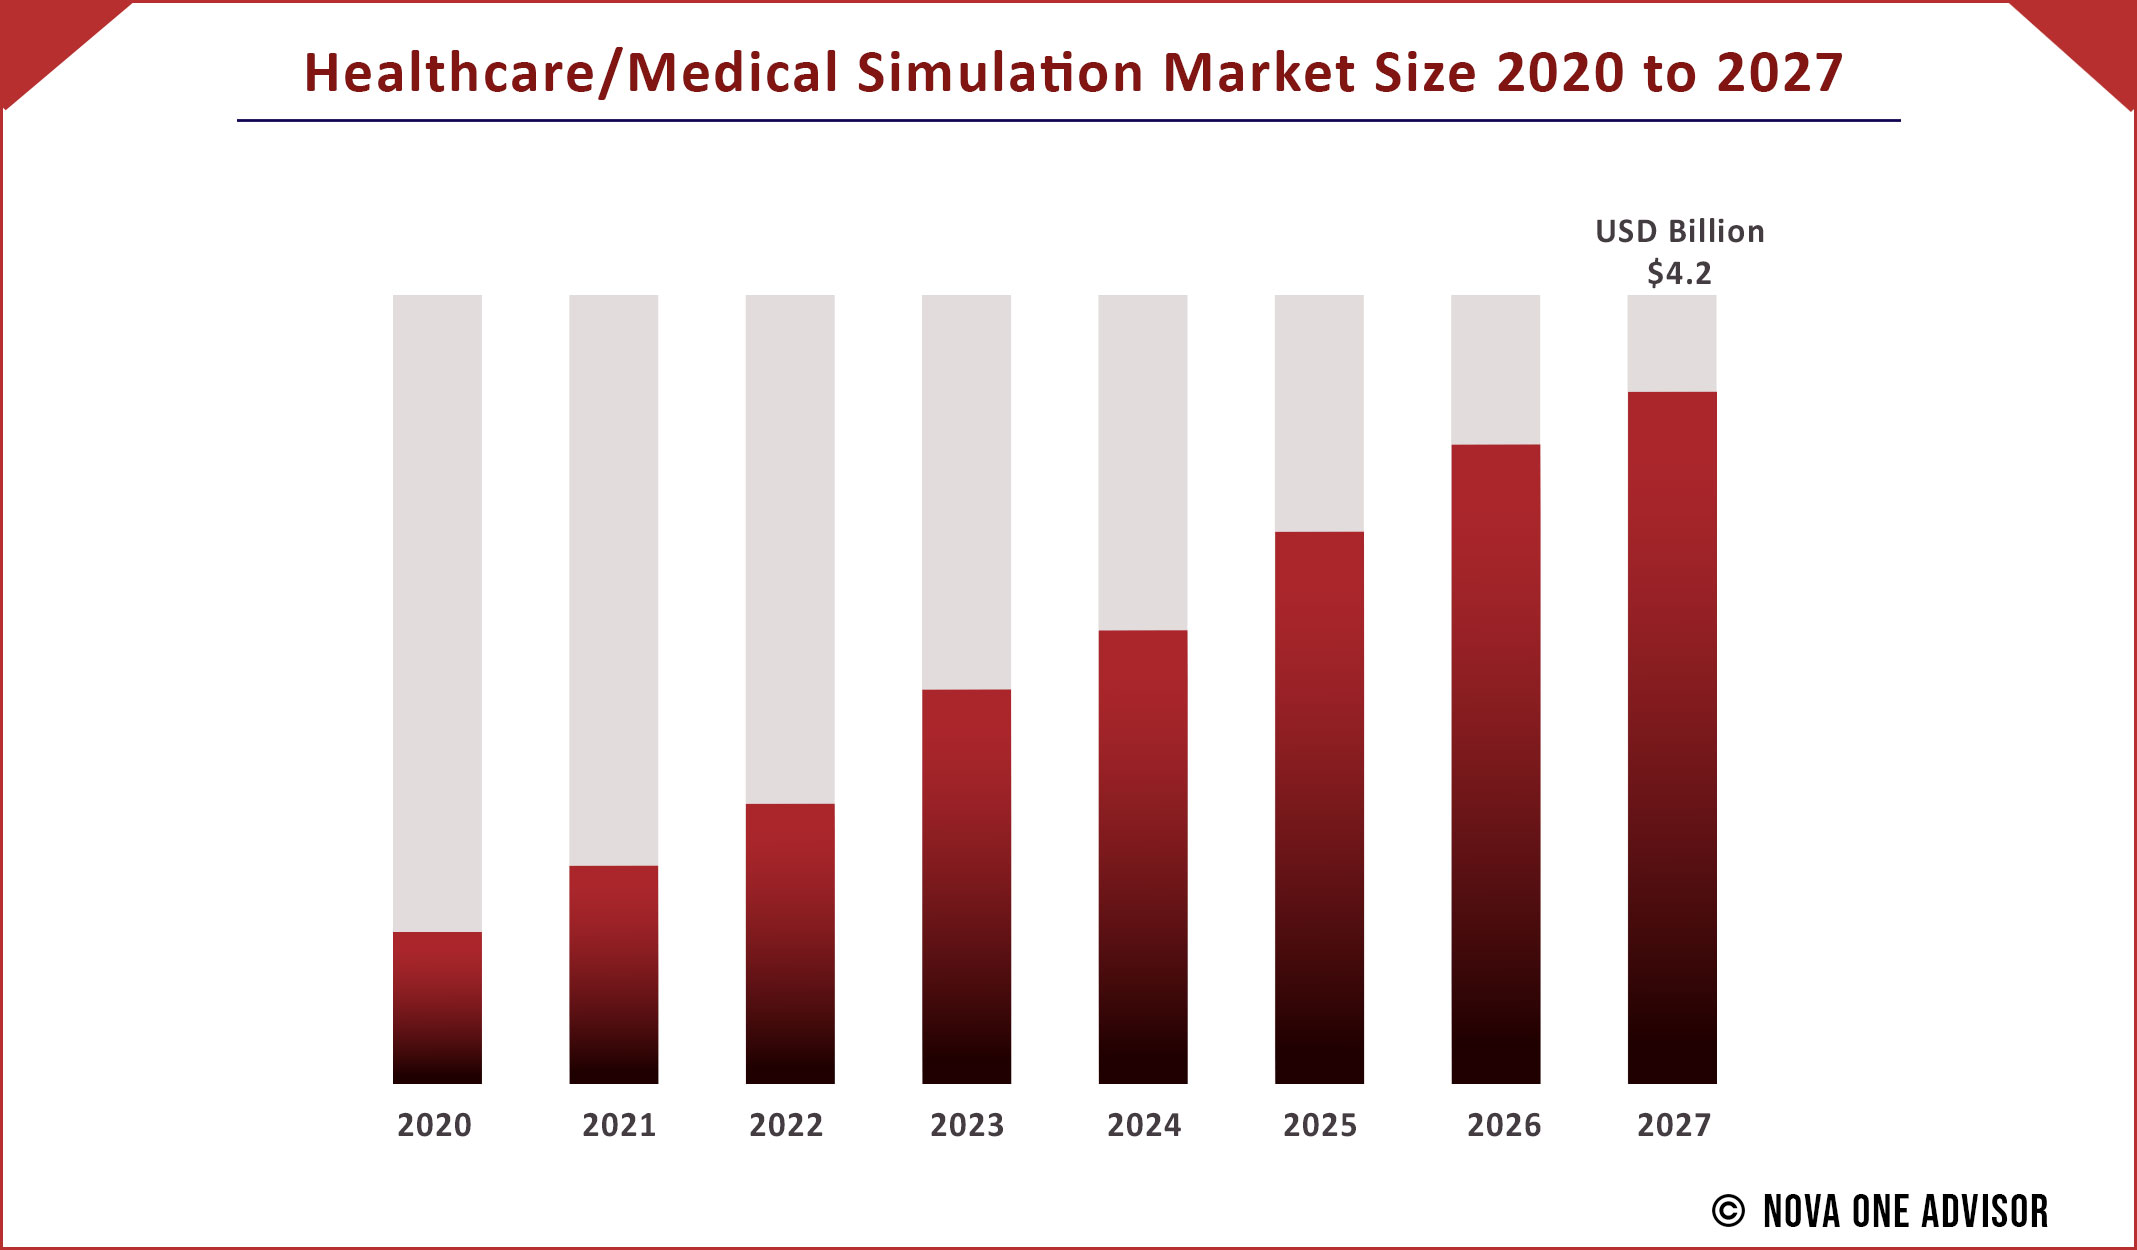 Healthcare/Medical Simulation Market Size 2020 to 2027